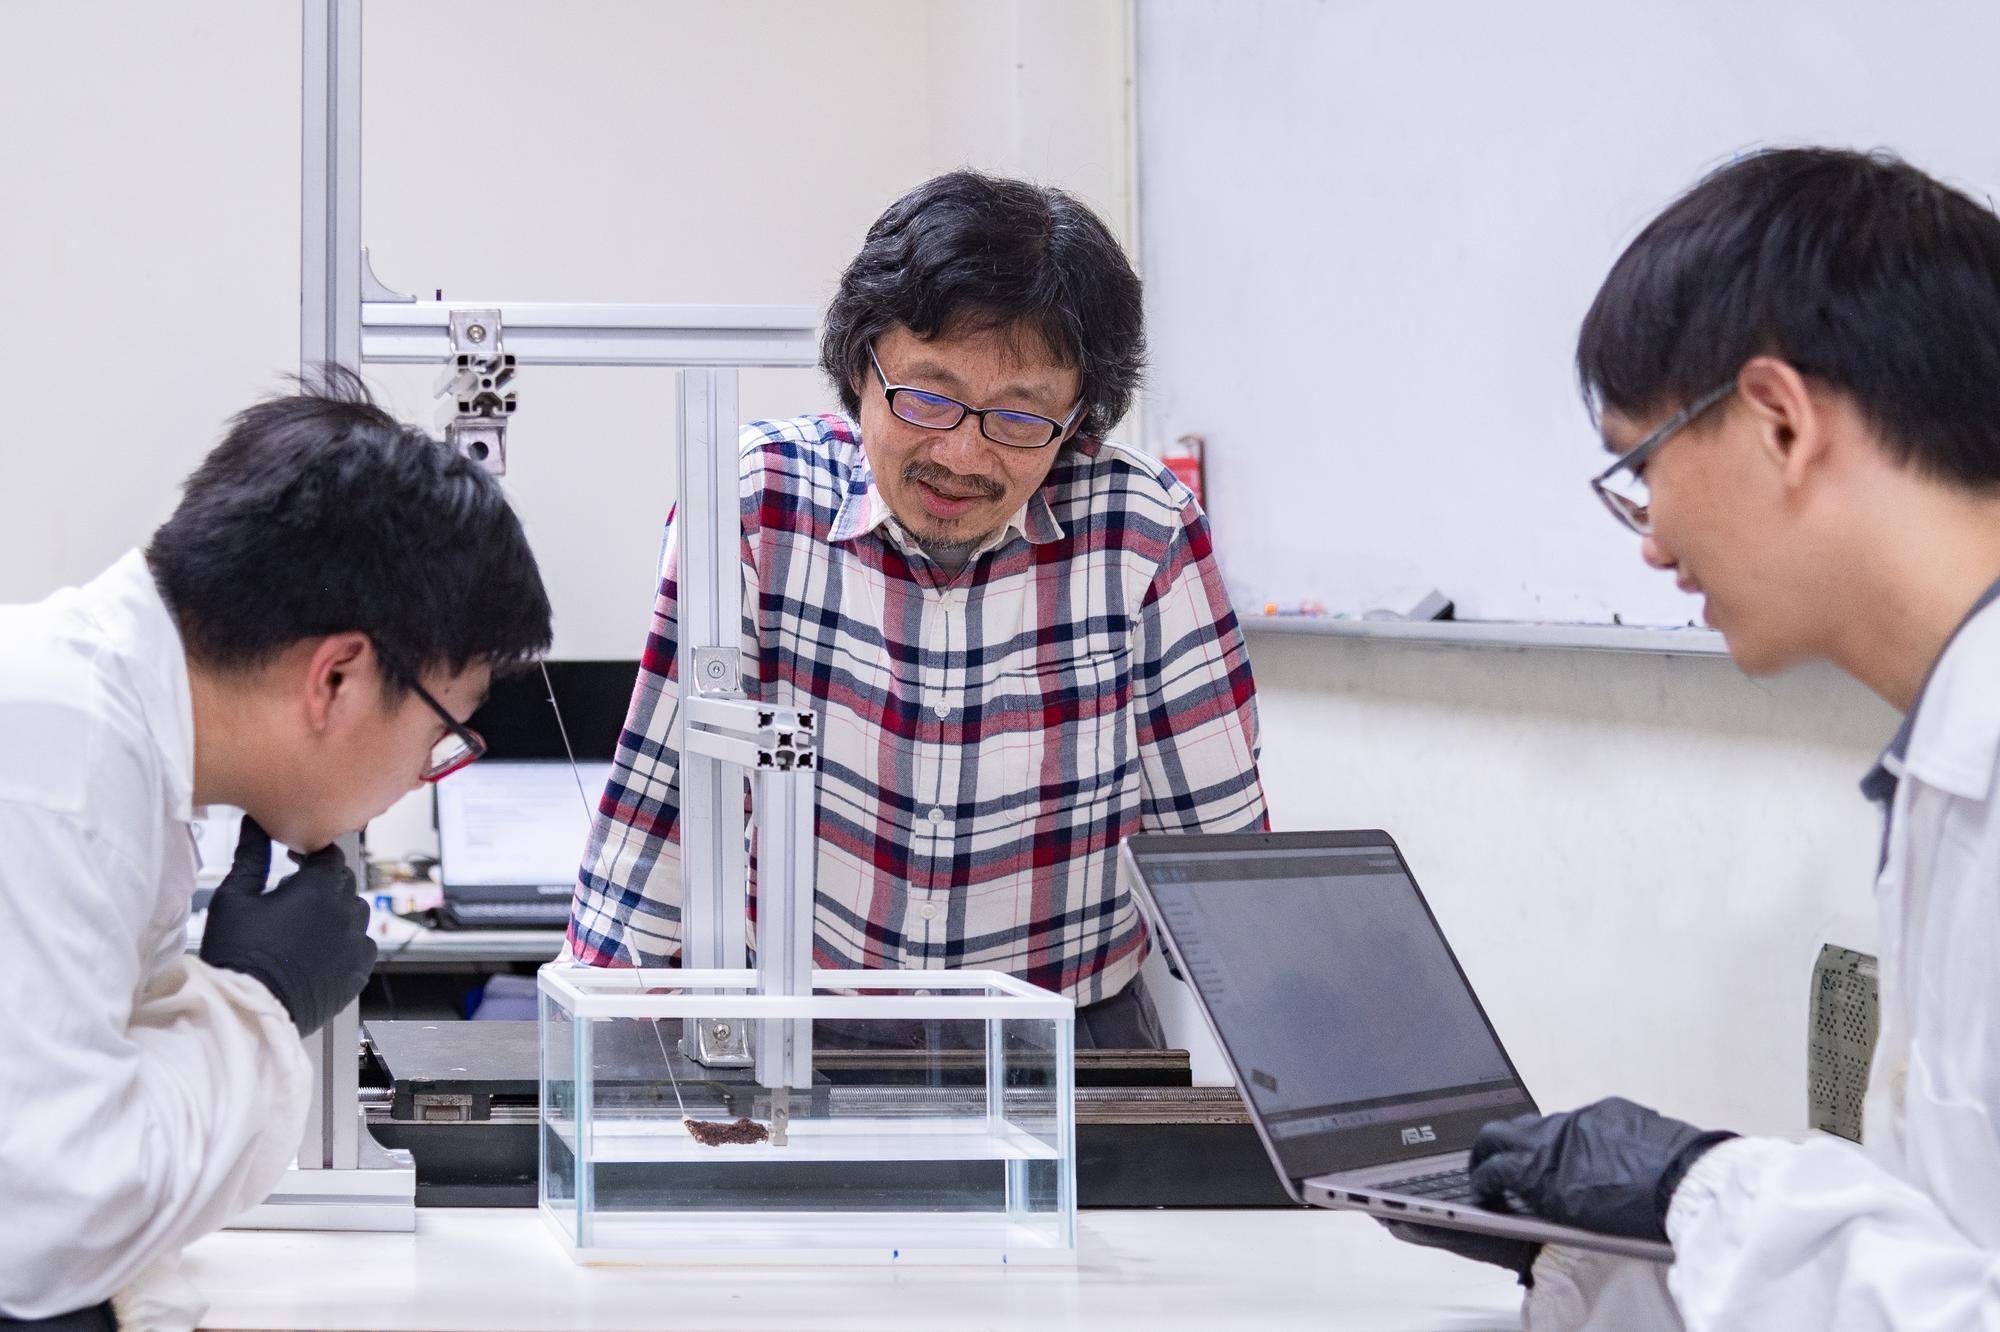 Professor Tzay-Ming Hong (洪在明) (center) from the Department of Physics at NTHU guides graduate students Chung-Hao Chen (陳中皓) (right) and Ting-Heng Hsieh (謝廷珩) (left) in researching the causes of fire ant rafting.